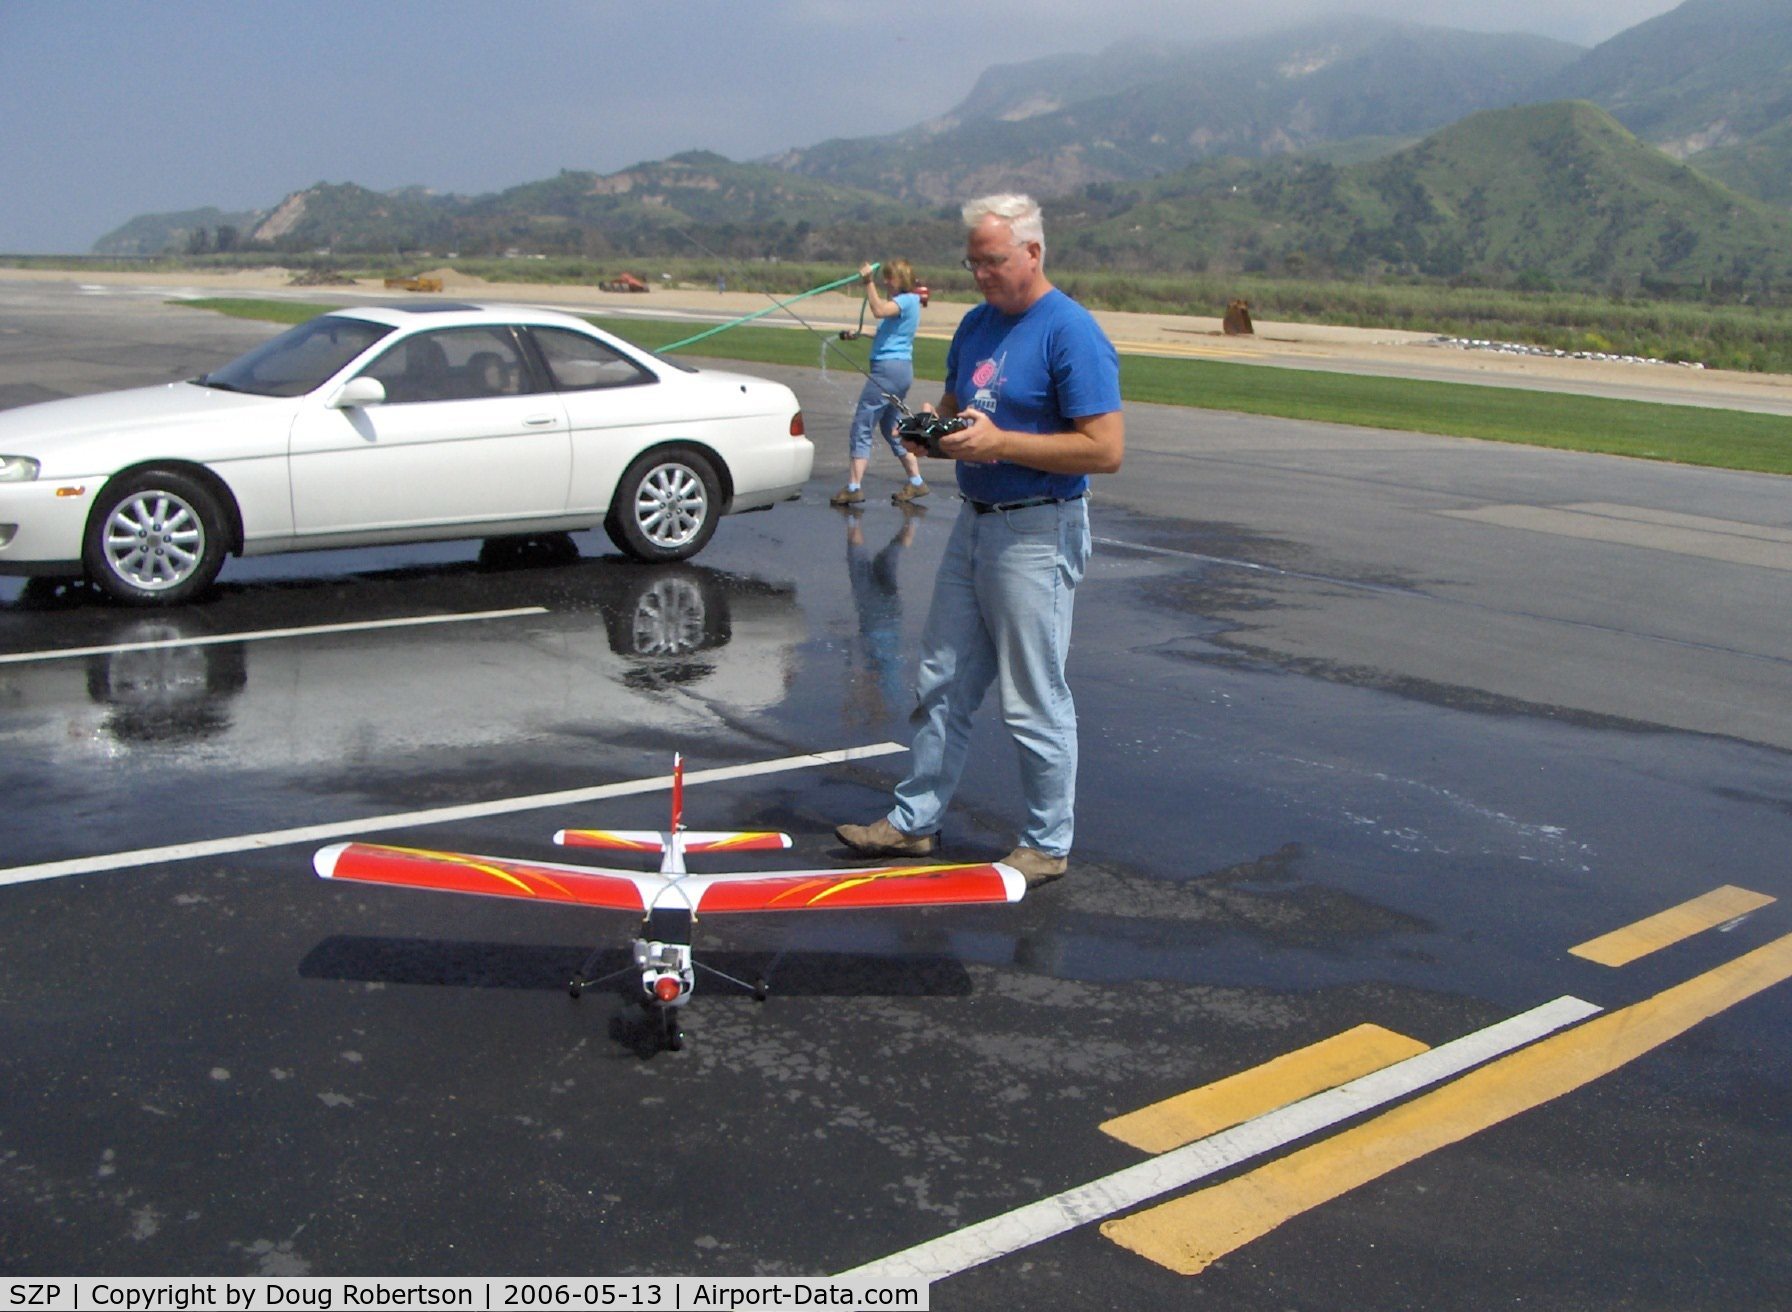 Santa Paula Airport (SZP) - 'N40TT' TIGER Trainer radio-controlled, diesel engine with preheat and muffler, taxying